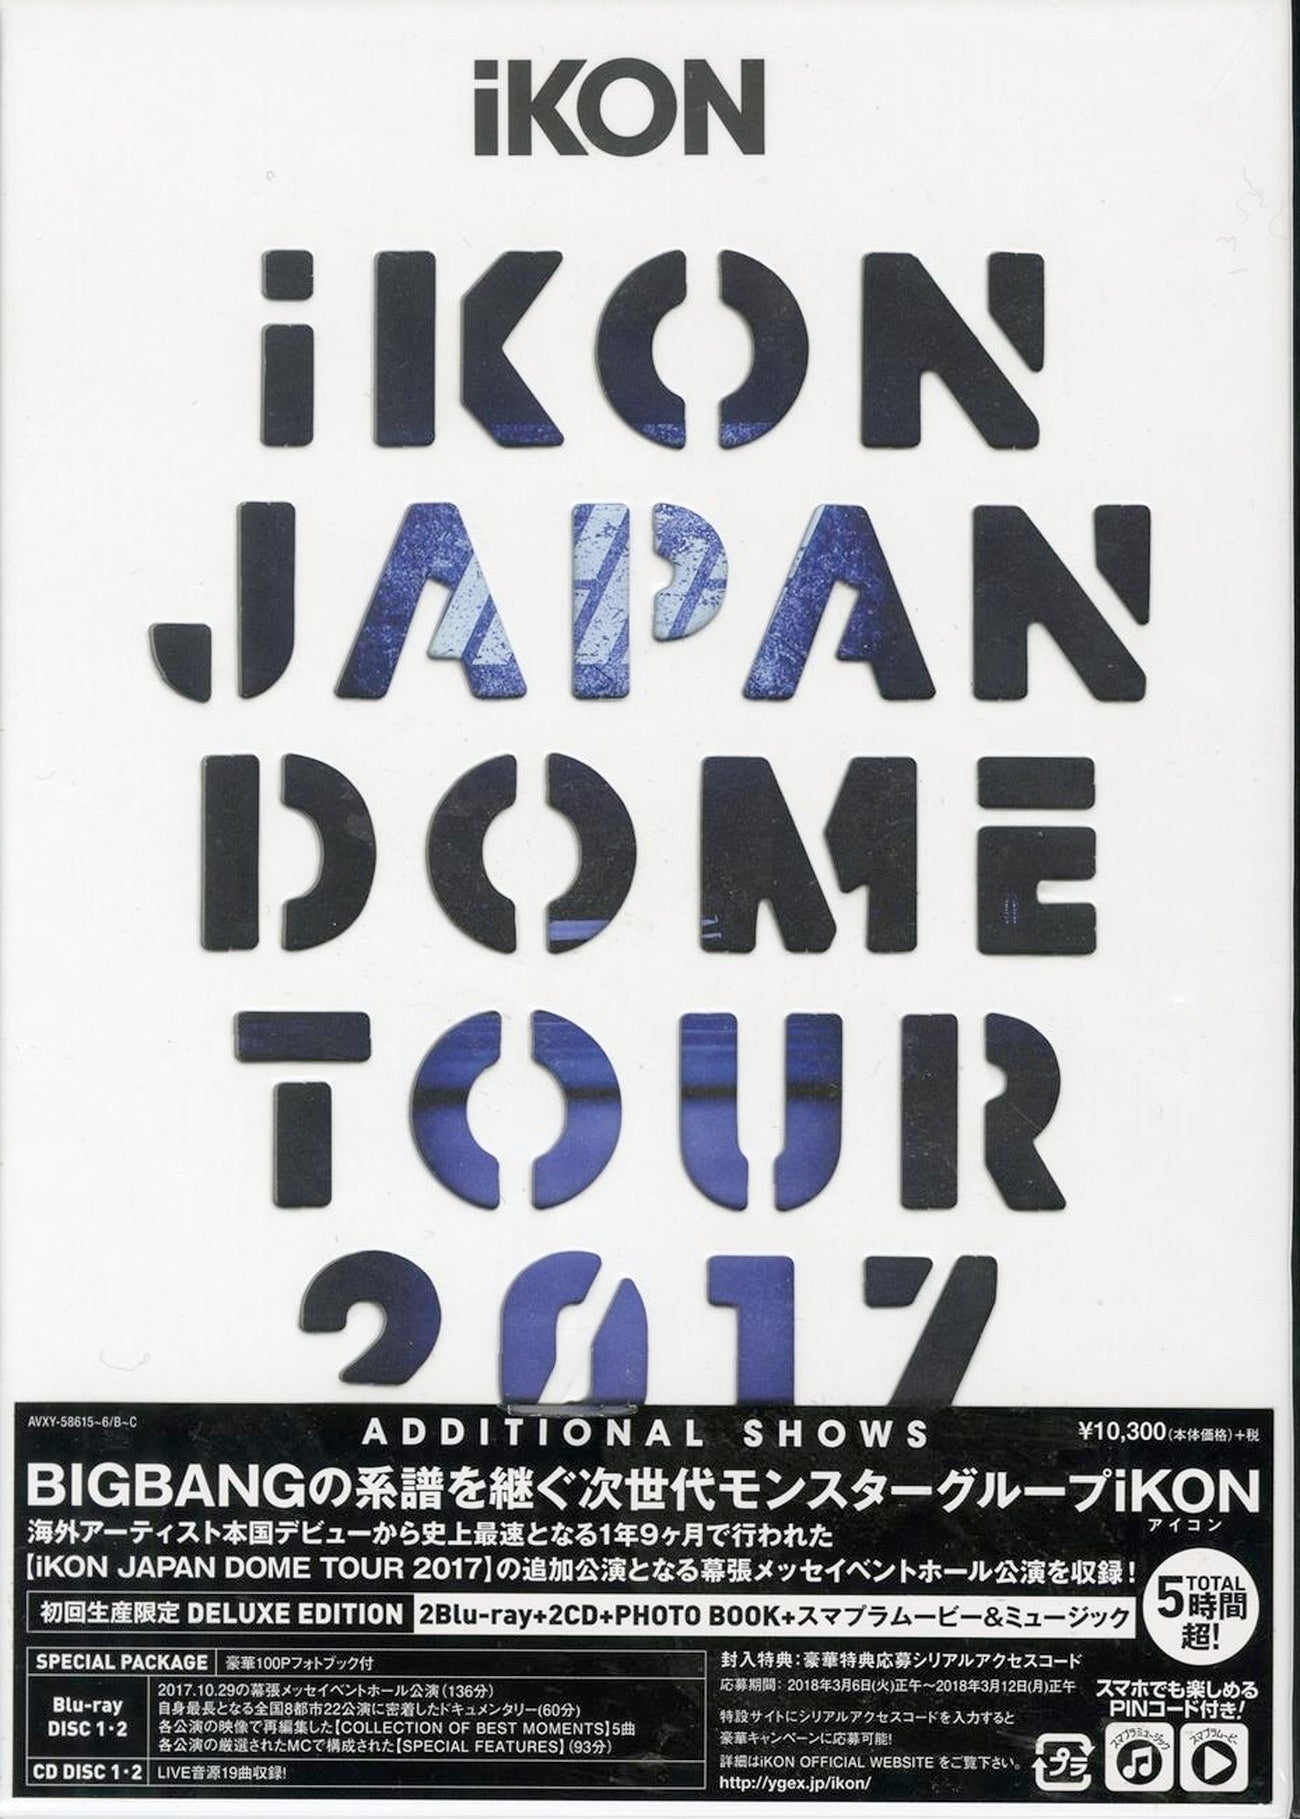 iKON JAPAN DOME TOUR 2017 ADDITIONAL SHOWS(DVD3枚組+CD2枚組)(スマプラ対応)(初回生産限定盤)：美的生活ヘルシーライフ本店  - DVD